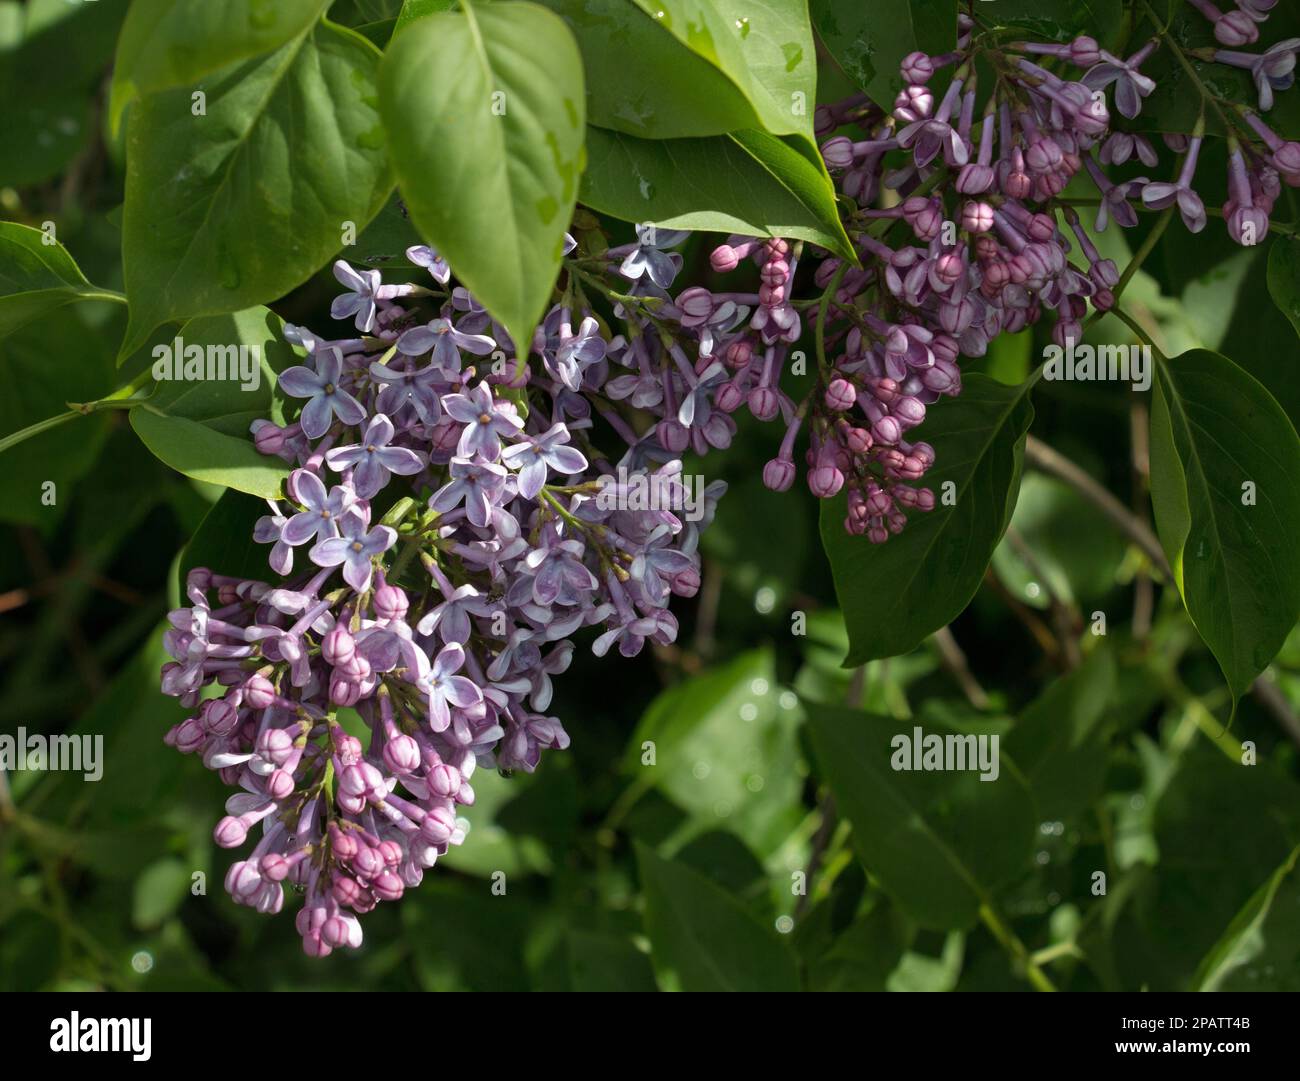 Purple flowers of the lilac tree shrub, Syringa vulgaris ‘President Lincoln’, blooming in late spring early summer on a natural green leaf background Stock Photo